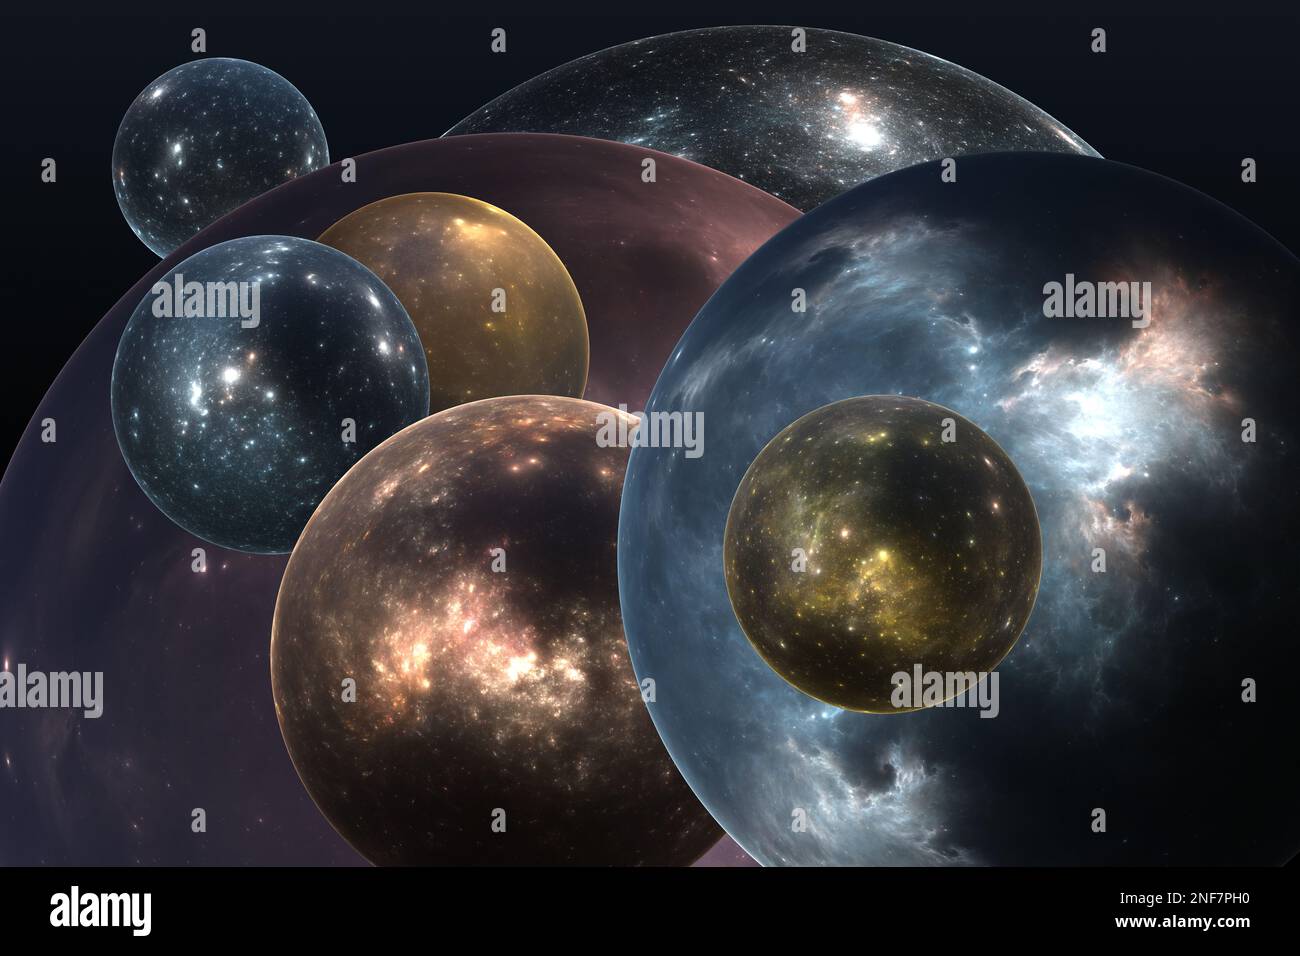 Multiverse. Other universes or alternate universes, hypothetical group of multiple universes. 3D illustration Stock Photo